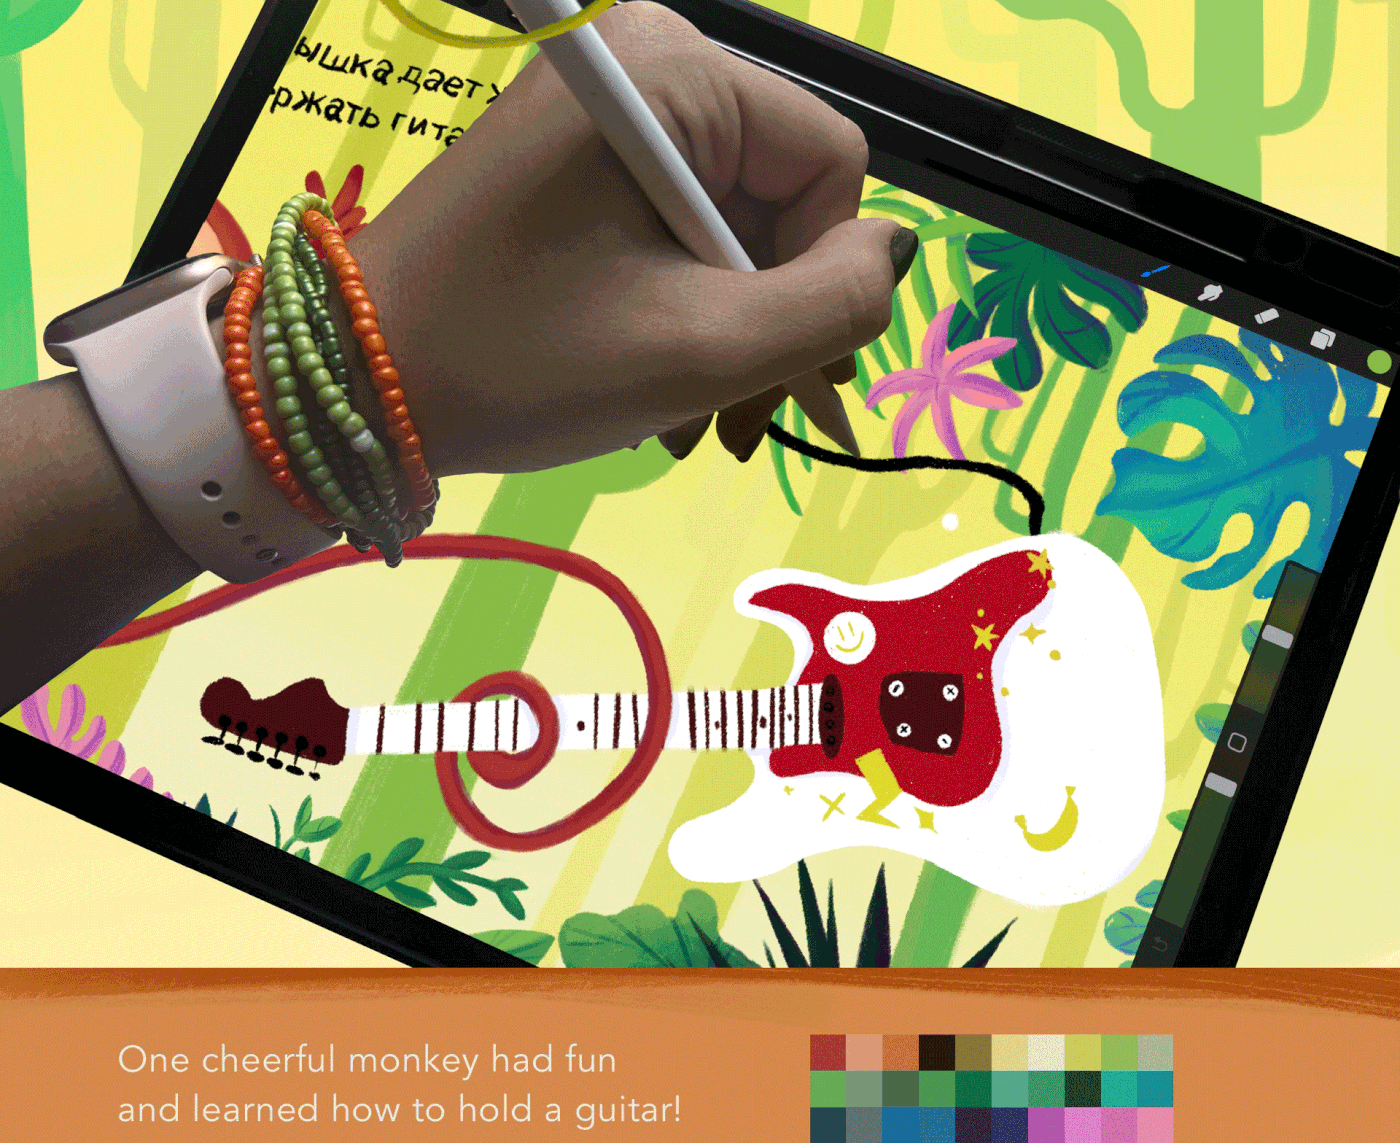 The process of creating a bright illustration depicting a jungle and a guitar.